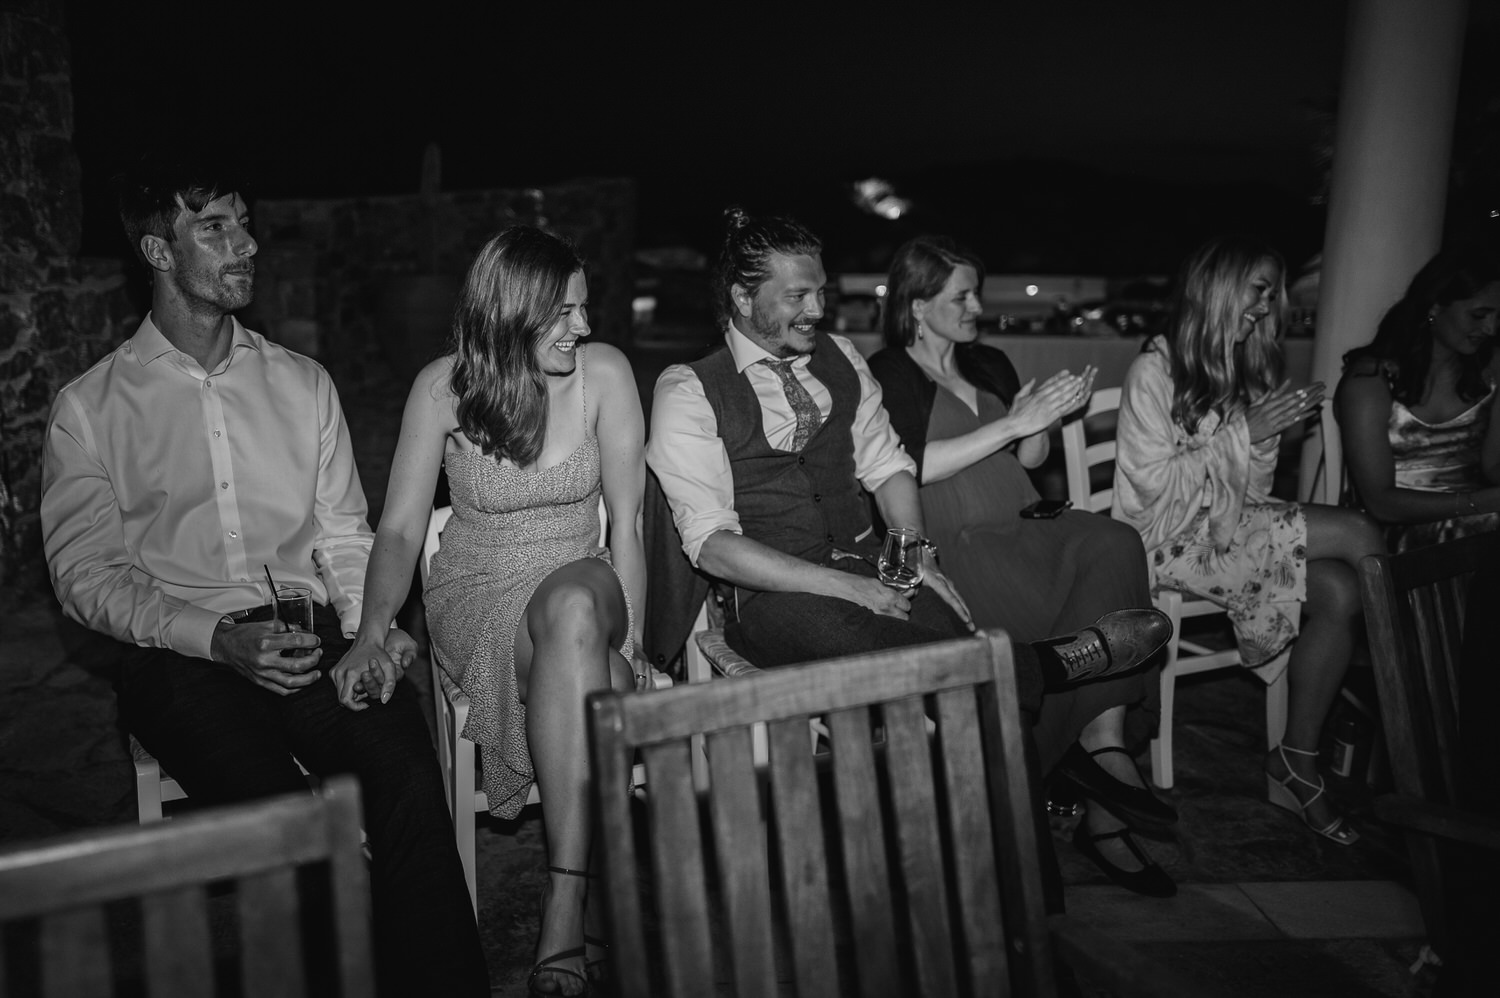 Mykonos wedding photographer: black and white photo of guests laughing sat around the groom during the speeches on Mykonos wedding.